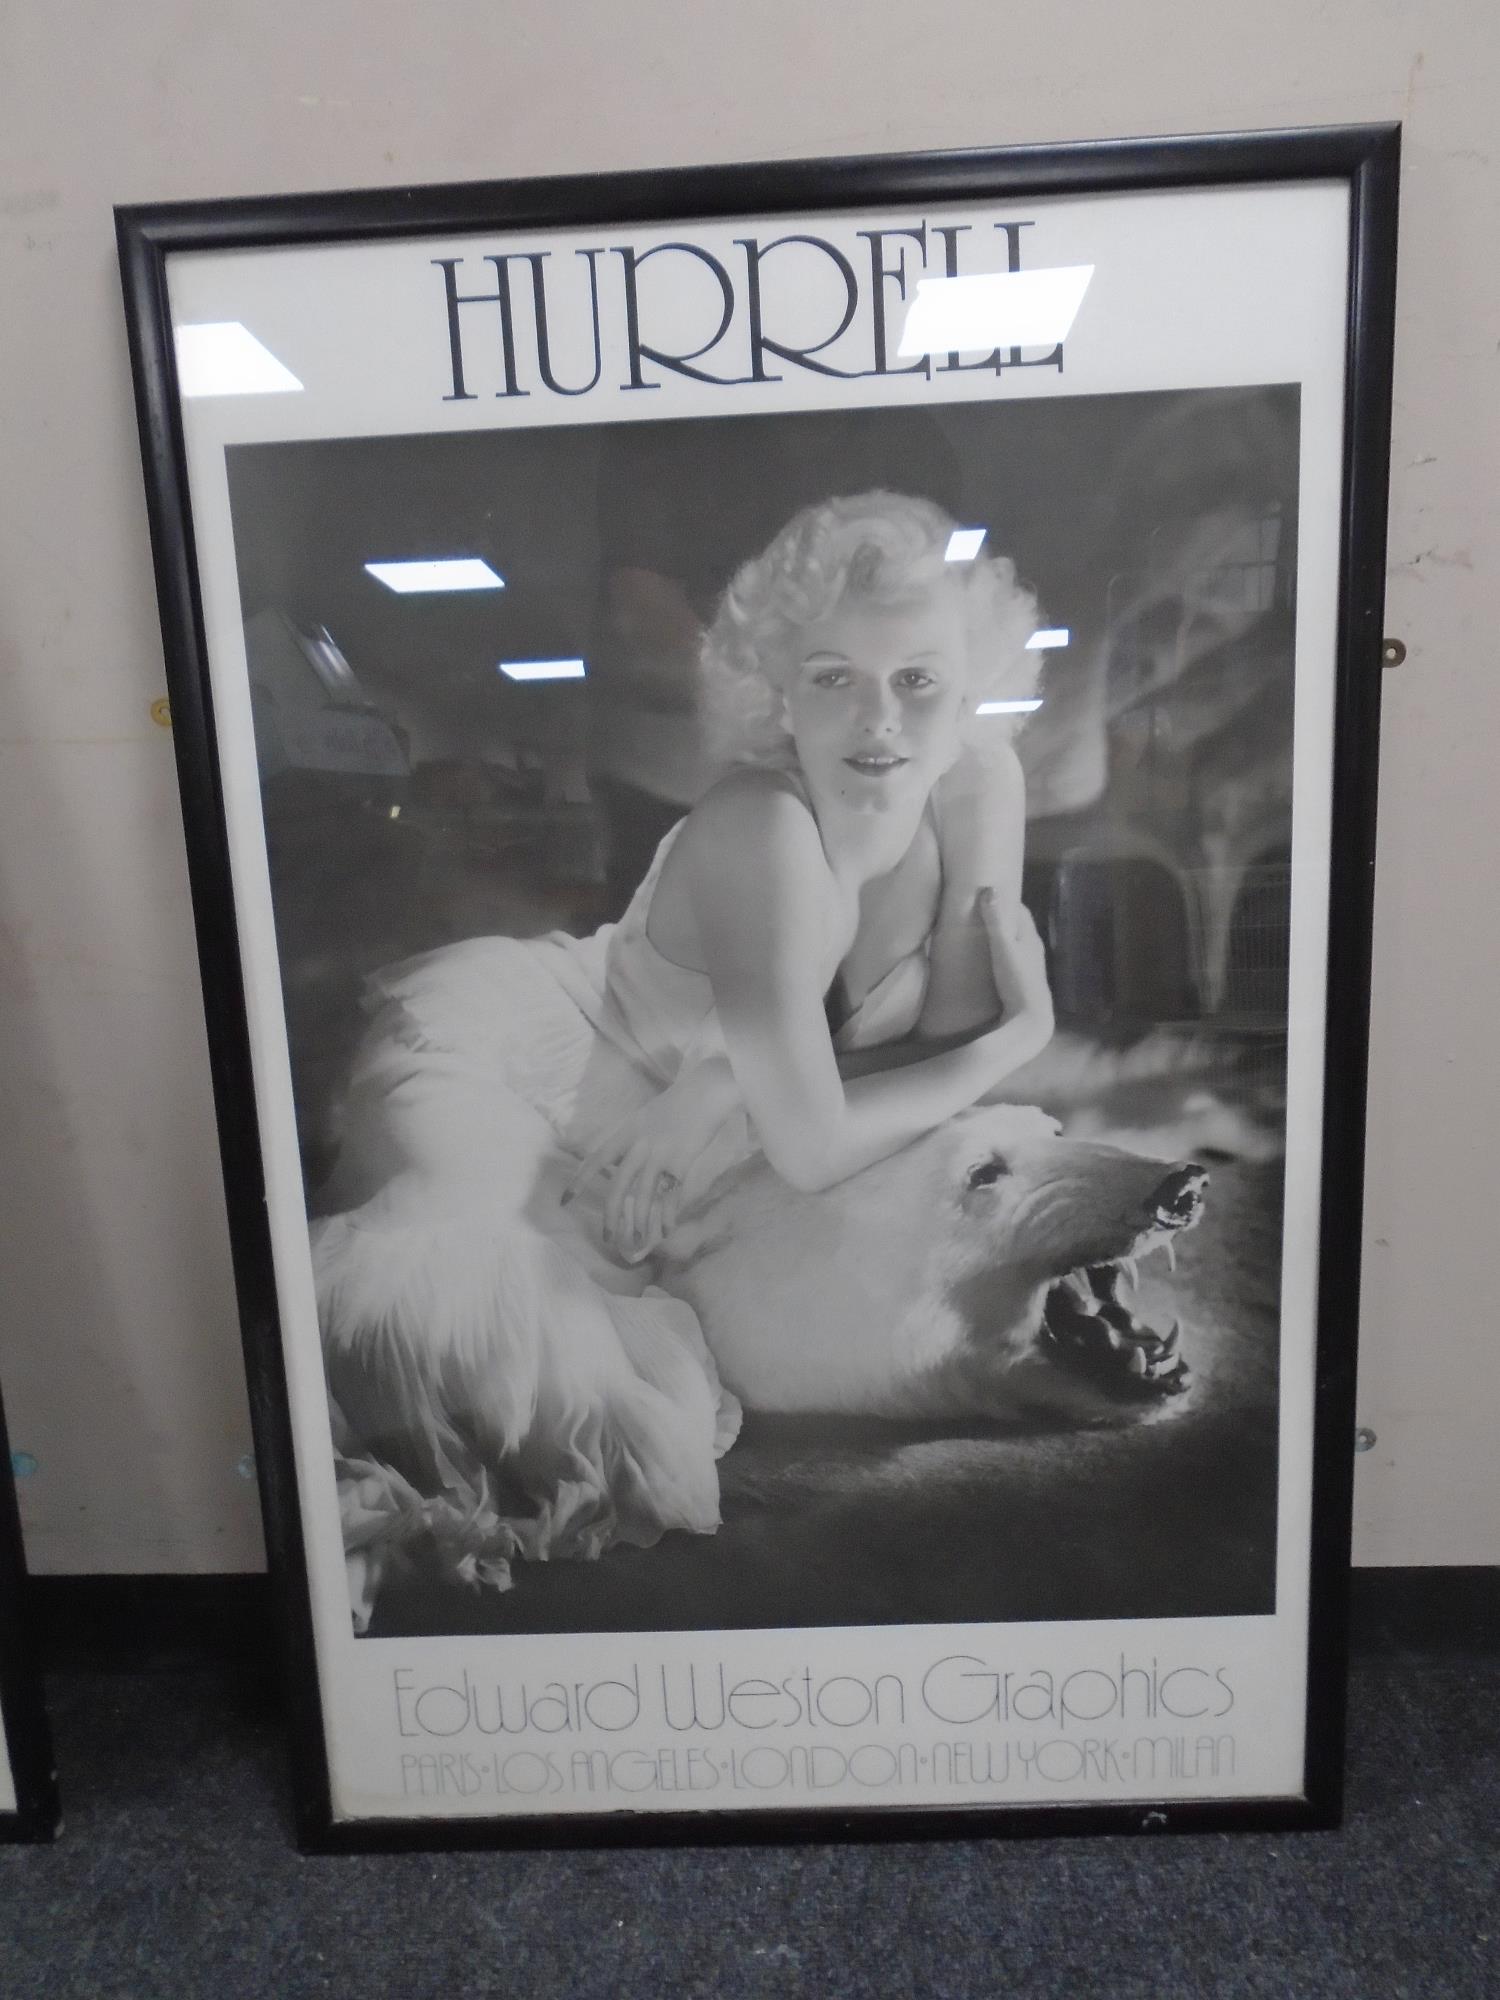 A 20th century Hurrell Edward Western Graphics poster, in frame.